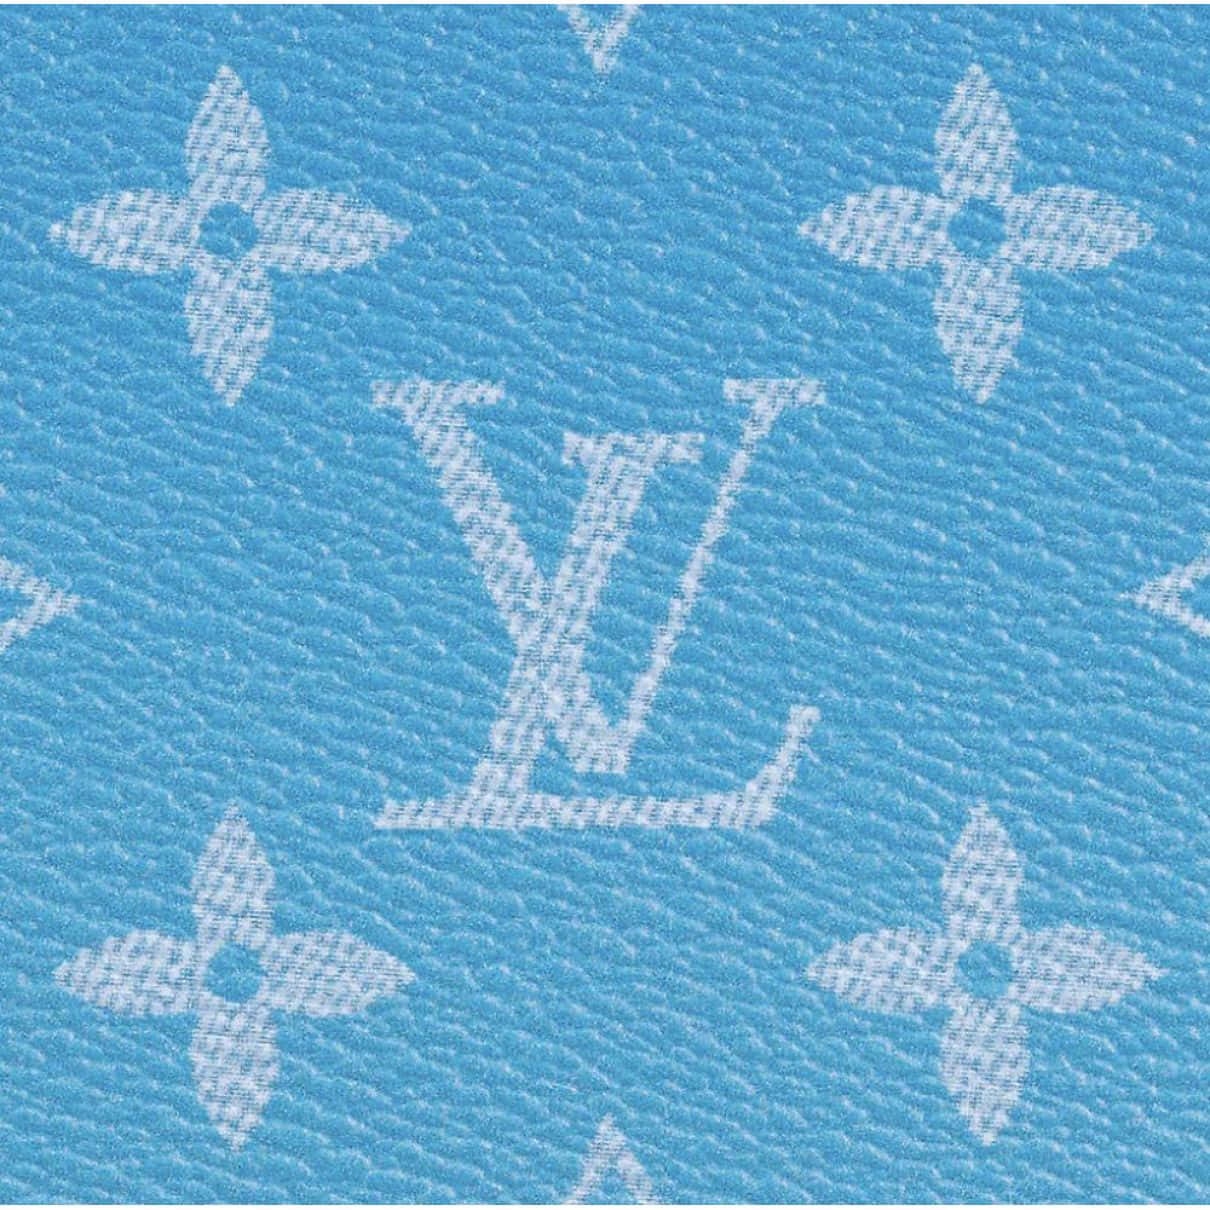 Make heads turn with the trending ombre blue Louis Vuitton bag. Wallpaper